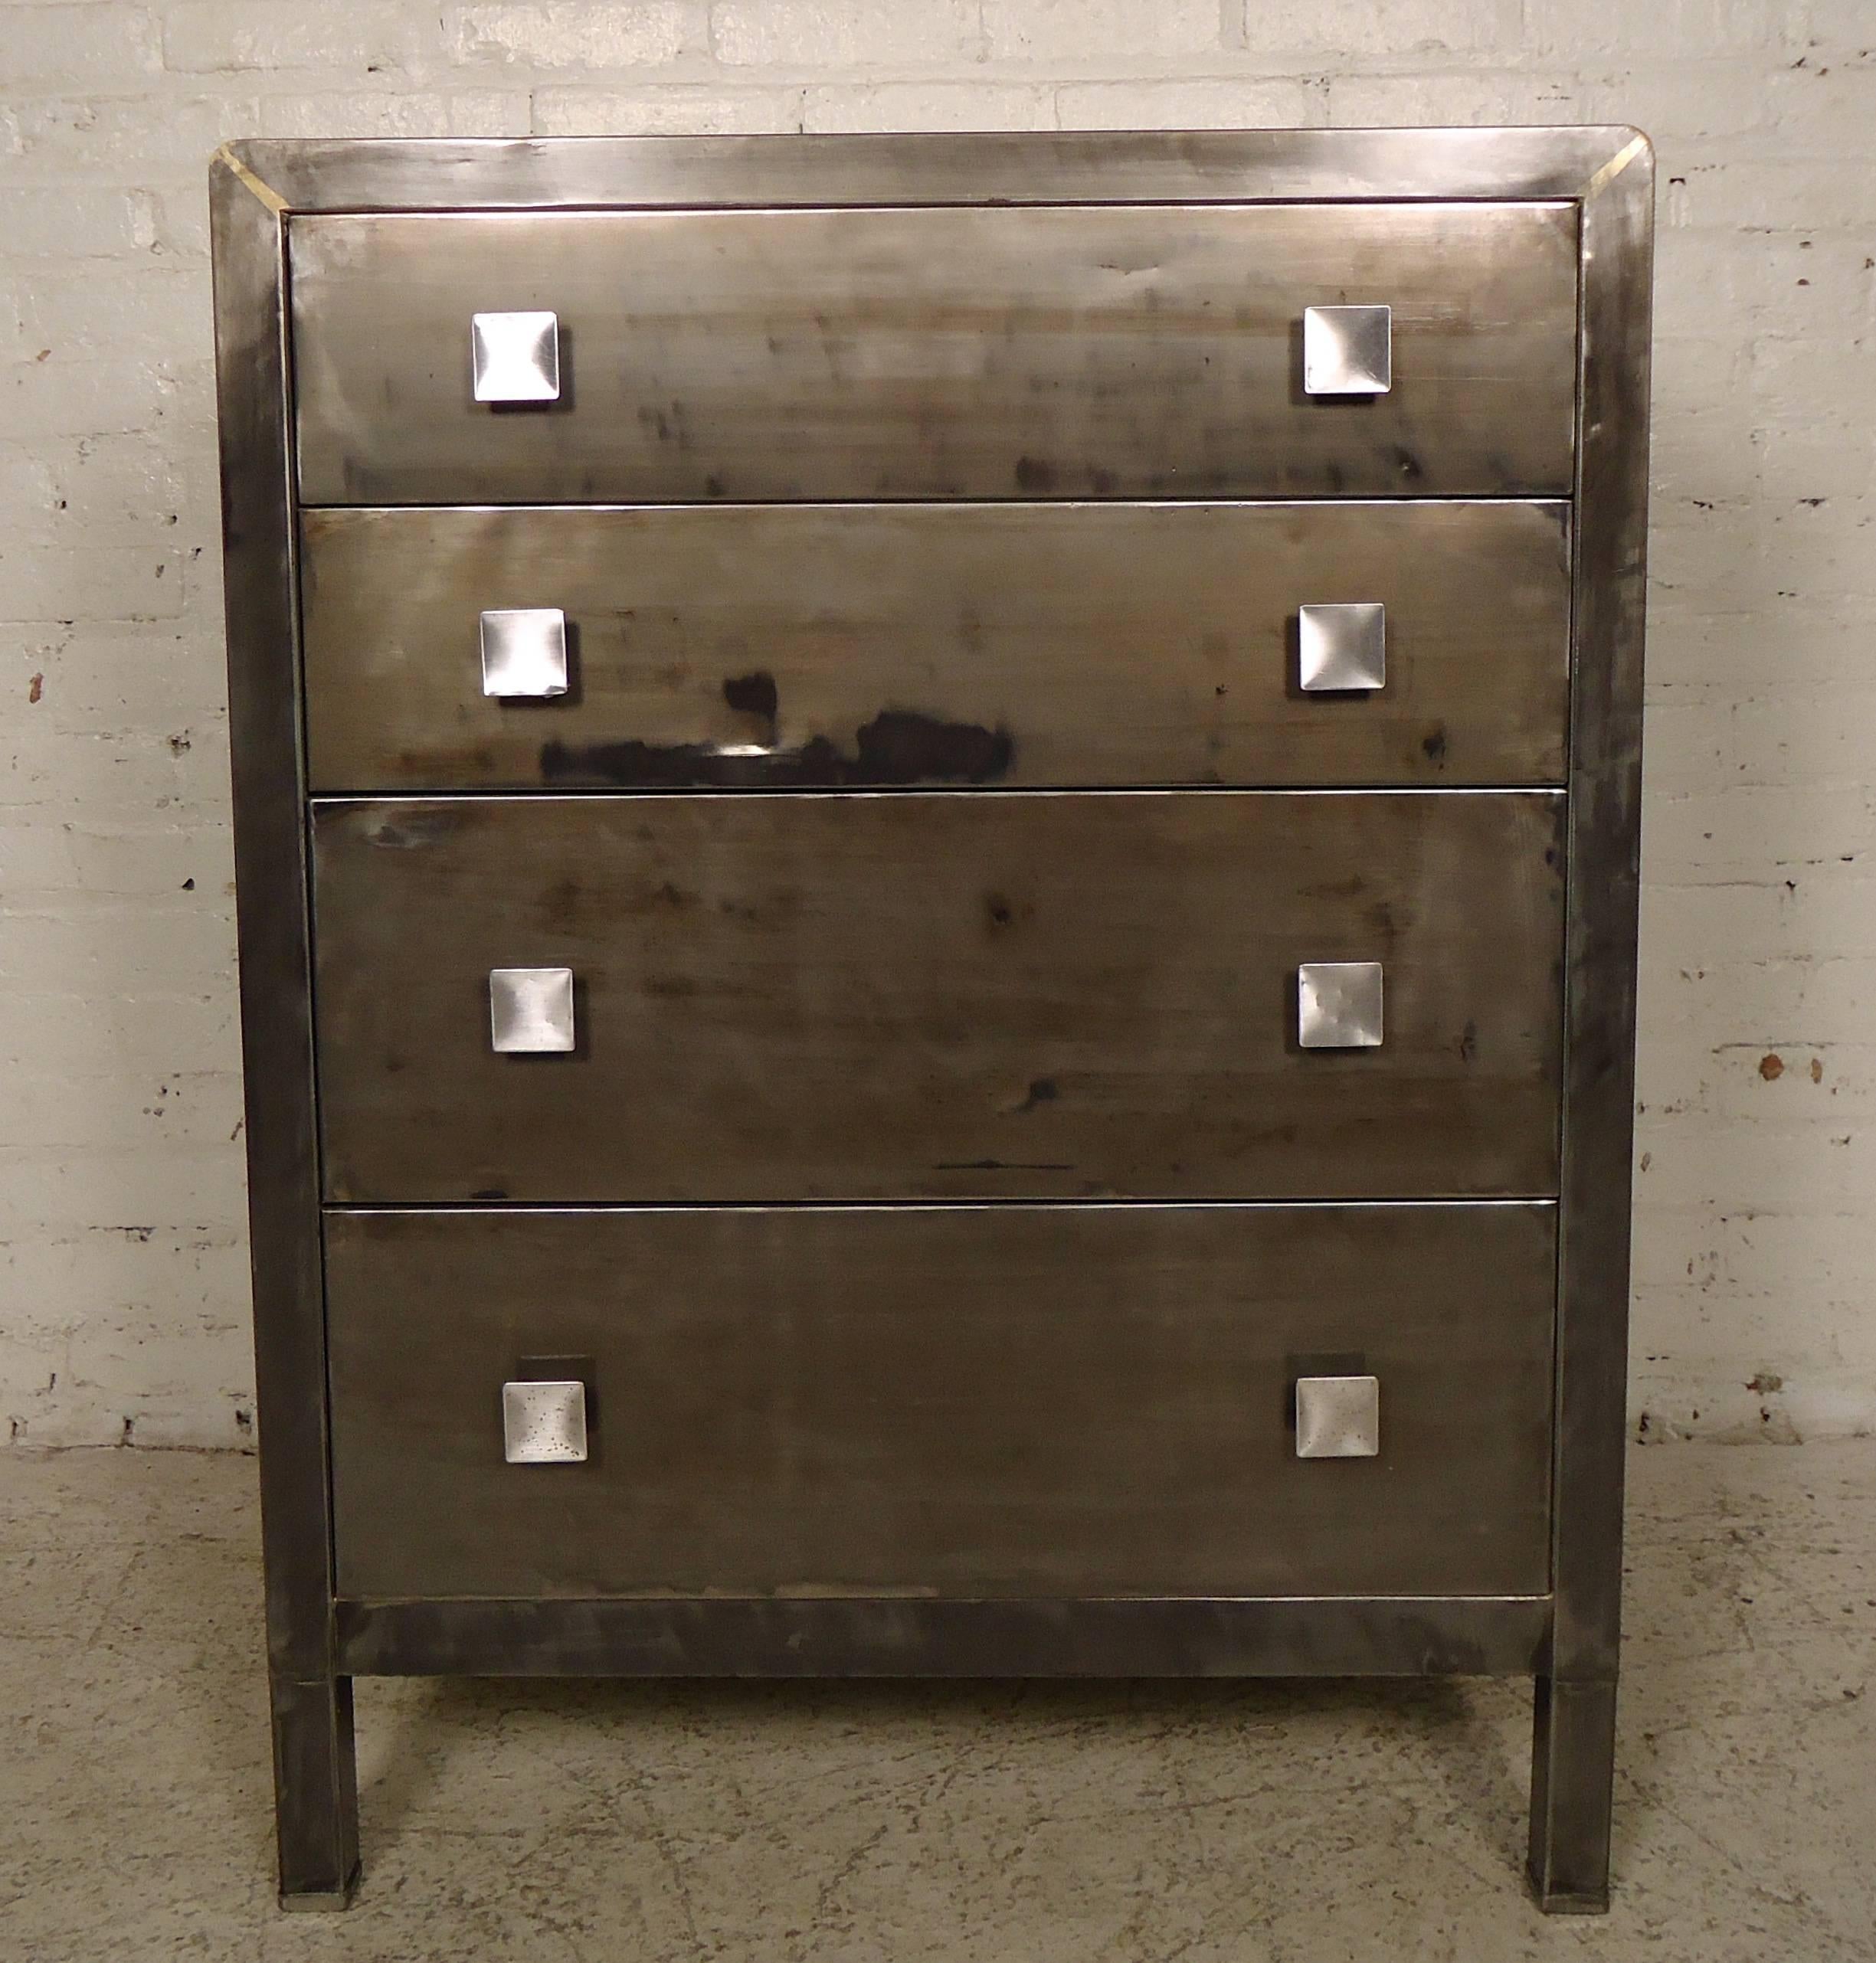 Mid-Century Modern designed dresser with four wide drawers with square handles. We have refinished this dresser in a bare metal style finish, giving a unique Industrial flair. 

(Please confirm item location NY or NJ with dealer).